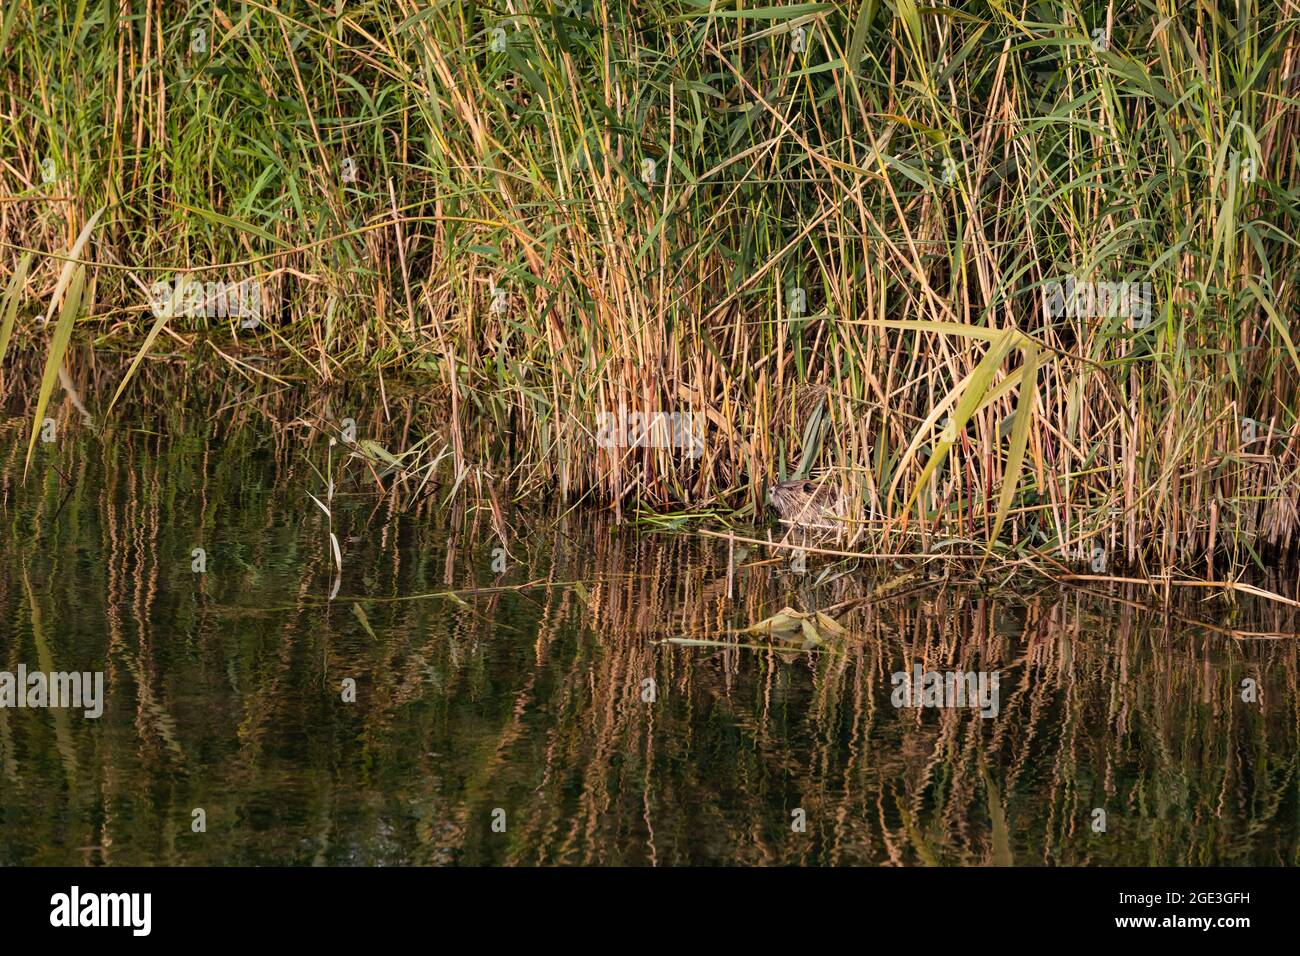 A beaver-like nutria in a body of water in a protected forest area with a lot of grass and marshland Stock Photo